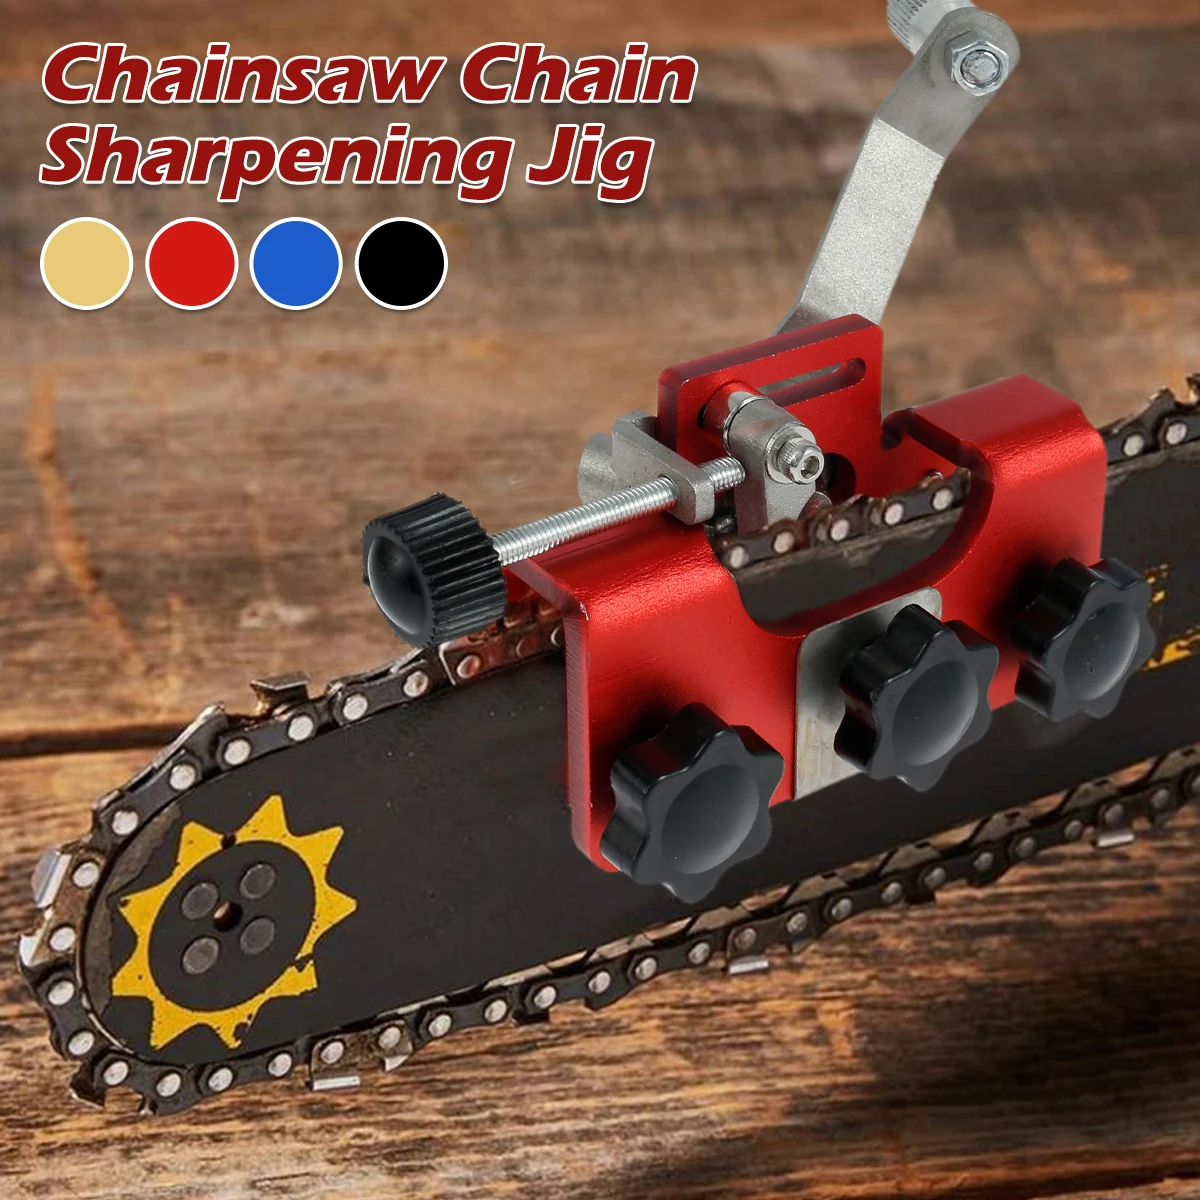 

Chainsaw Sharpener With Grinder Stones Chainsaw Chain Sharpening Jig Chain Saw Sharpen Tool For Most Chain Saws Electric Saws